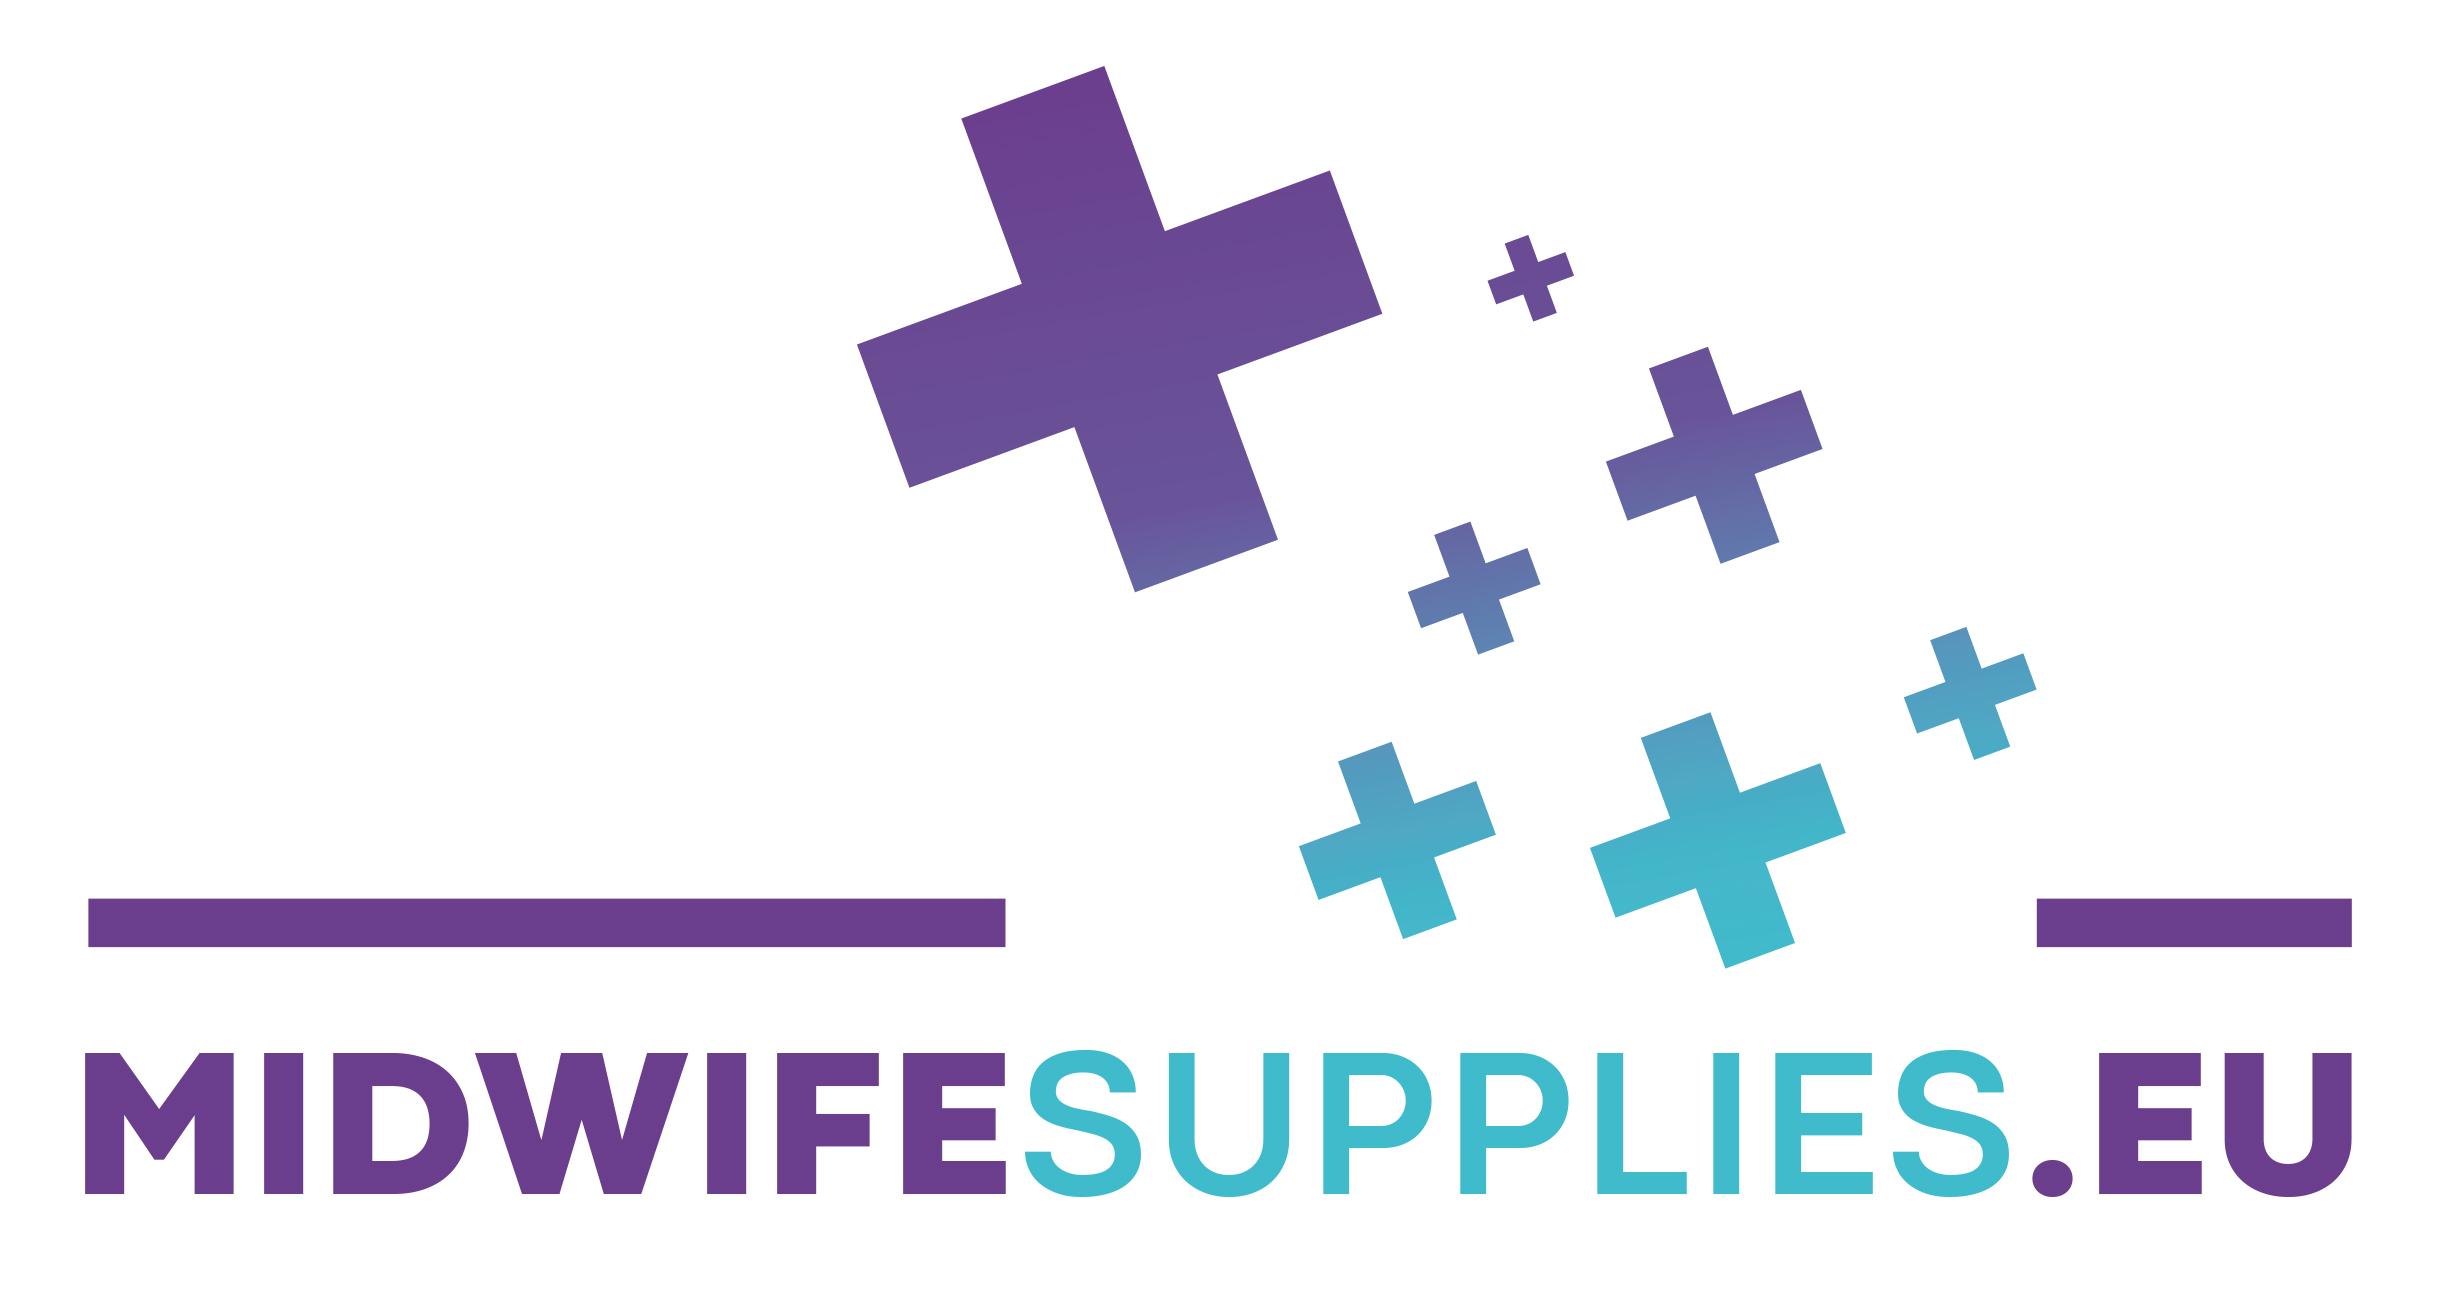 Midwife supplies